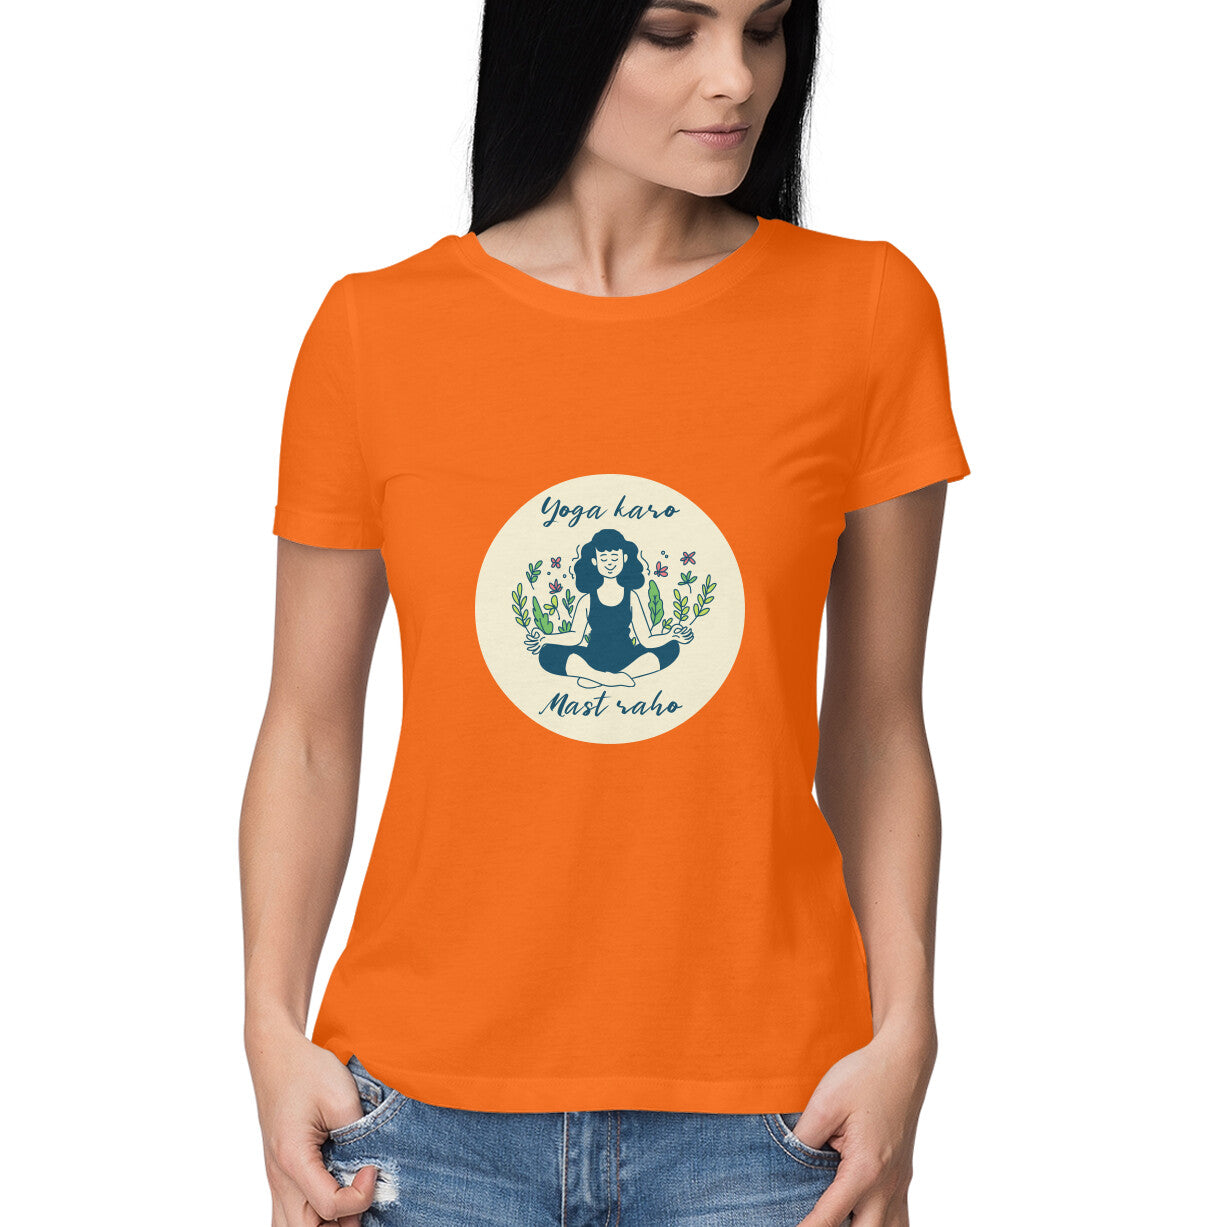 Poses of yoga- women's yoga t shirt. Made in India by Simply